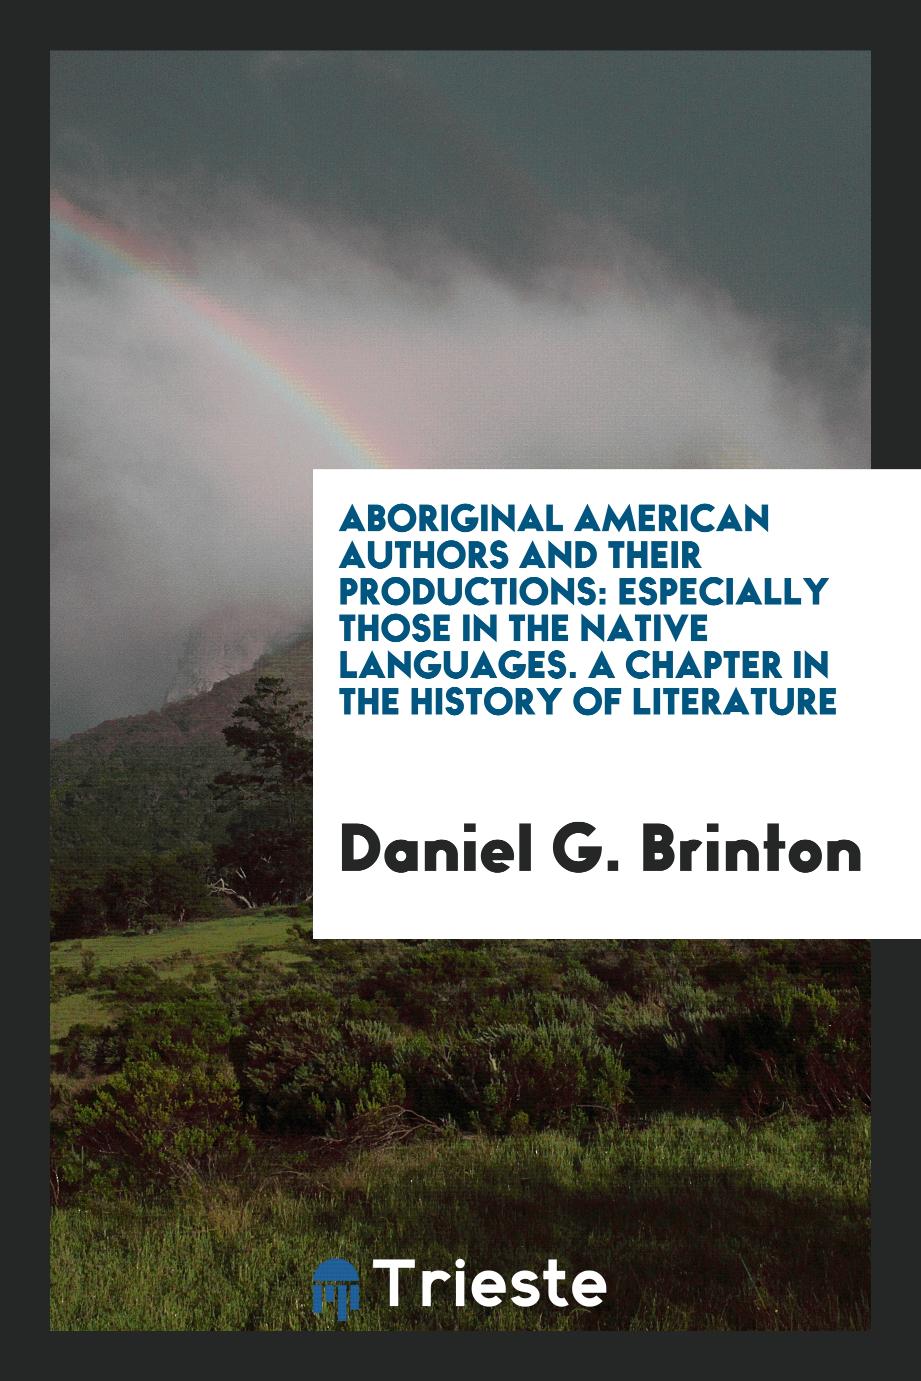 Aboriginal American Authors and Their Productions: Especially Those in the Native Languages. A chapter in the history of literature